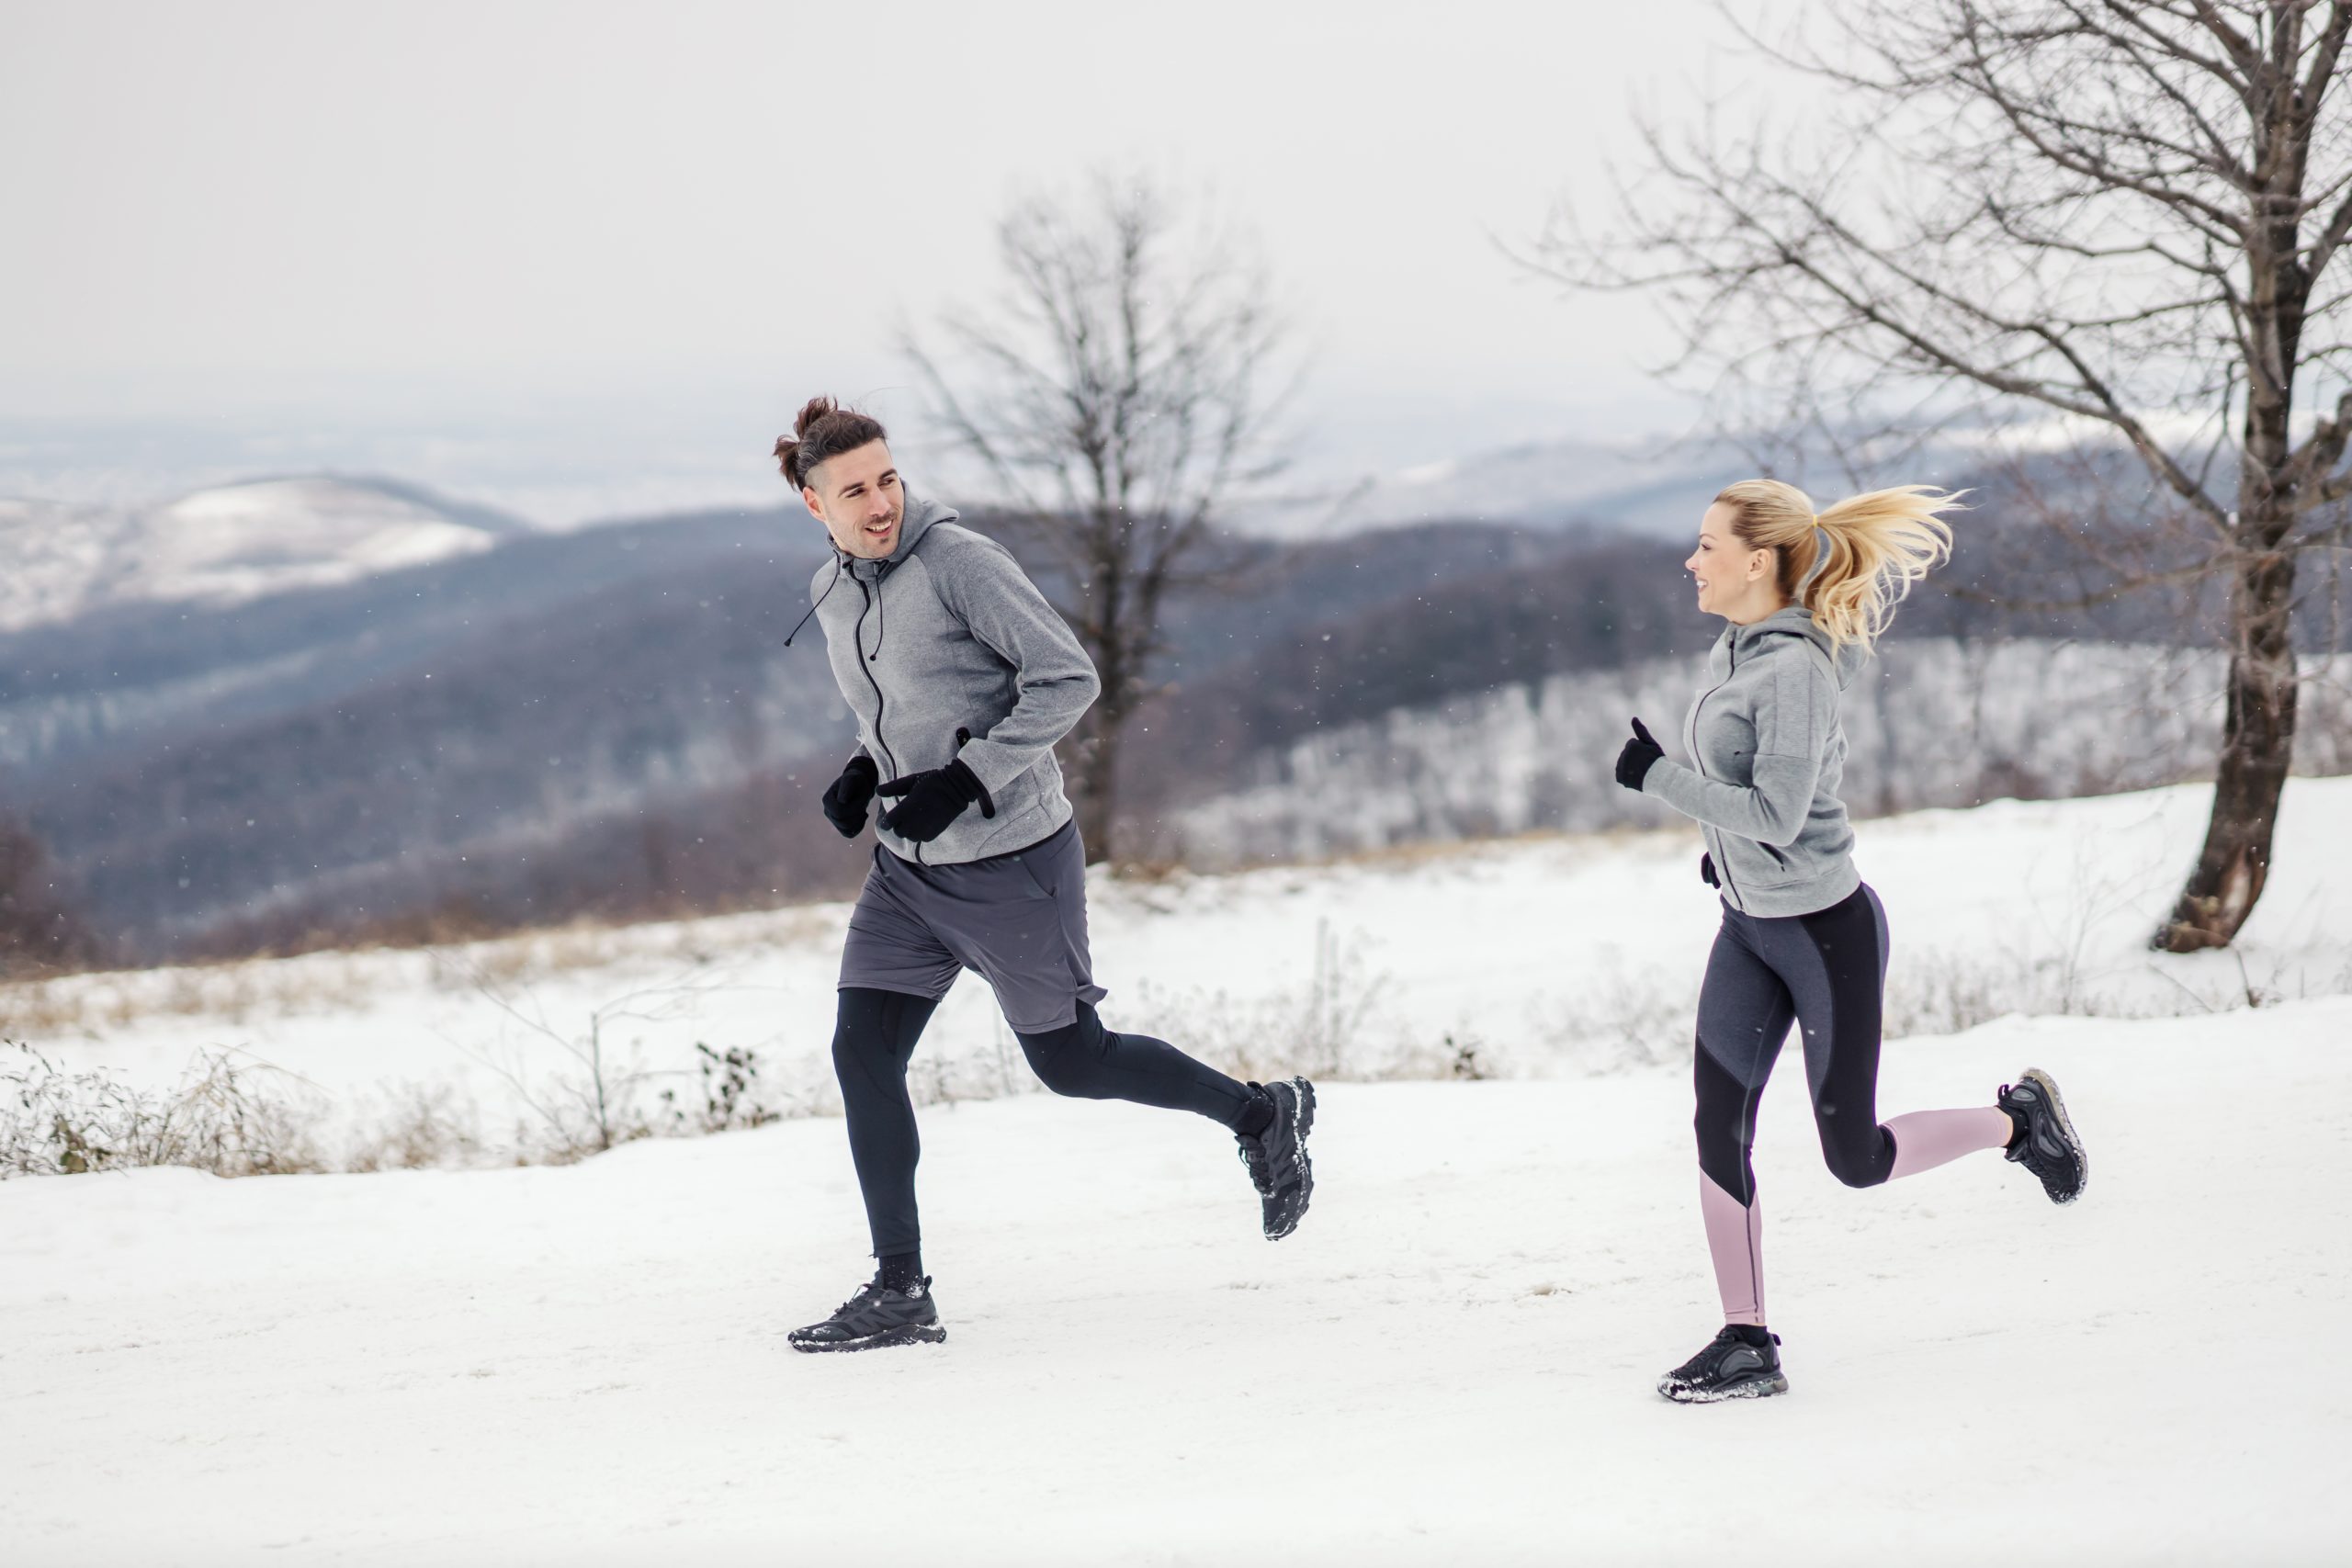 Build healthy winter habits that go beyond performace!